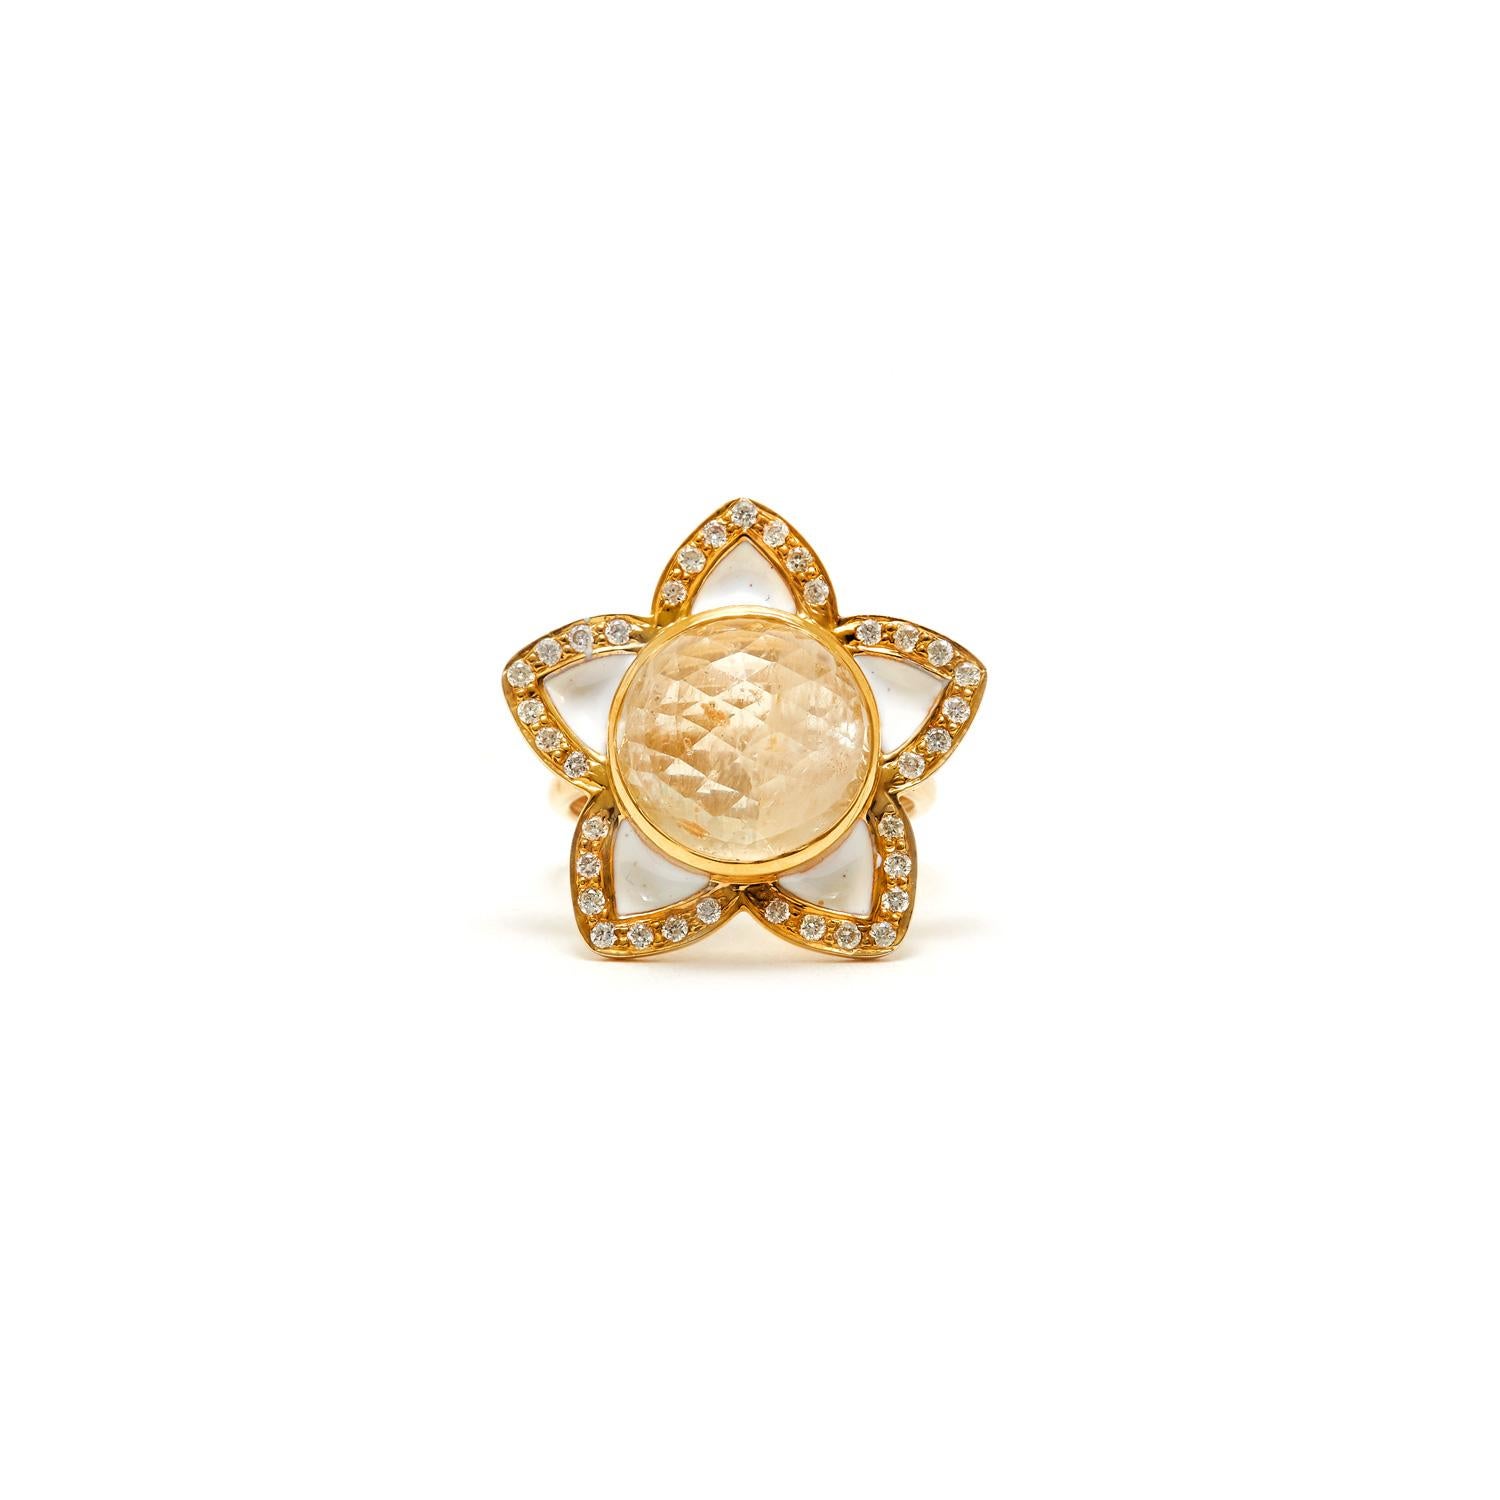 A 16 Carat Yellow Sapphire Champagne Diamond Enamel Cocktail  Ring. 
A luminescent checker cut dome yellow sapphire in a glossy white enamel star setting accented with champagne diamonds  and set in 18 karat gold.

- Yellow Sapphire 16.26 karats 
-